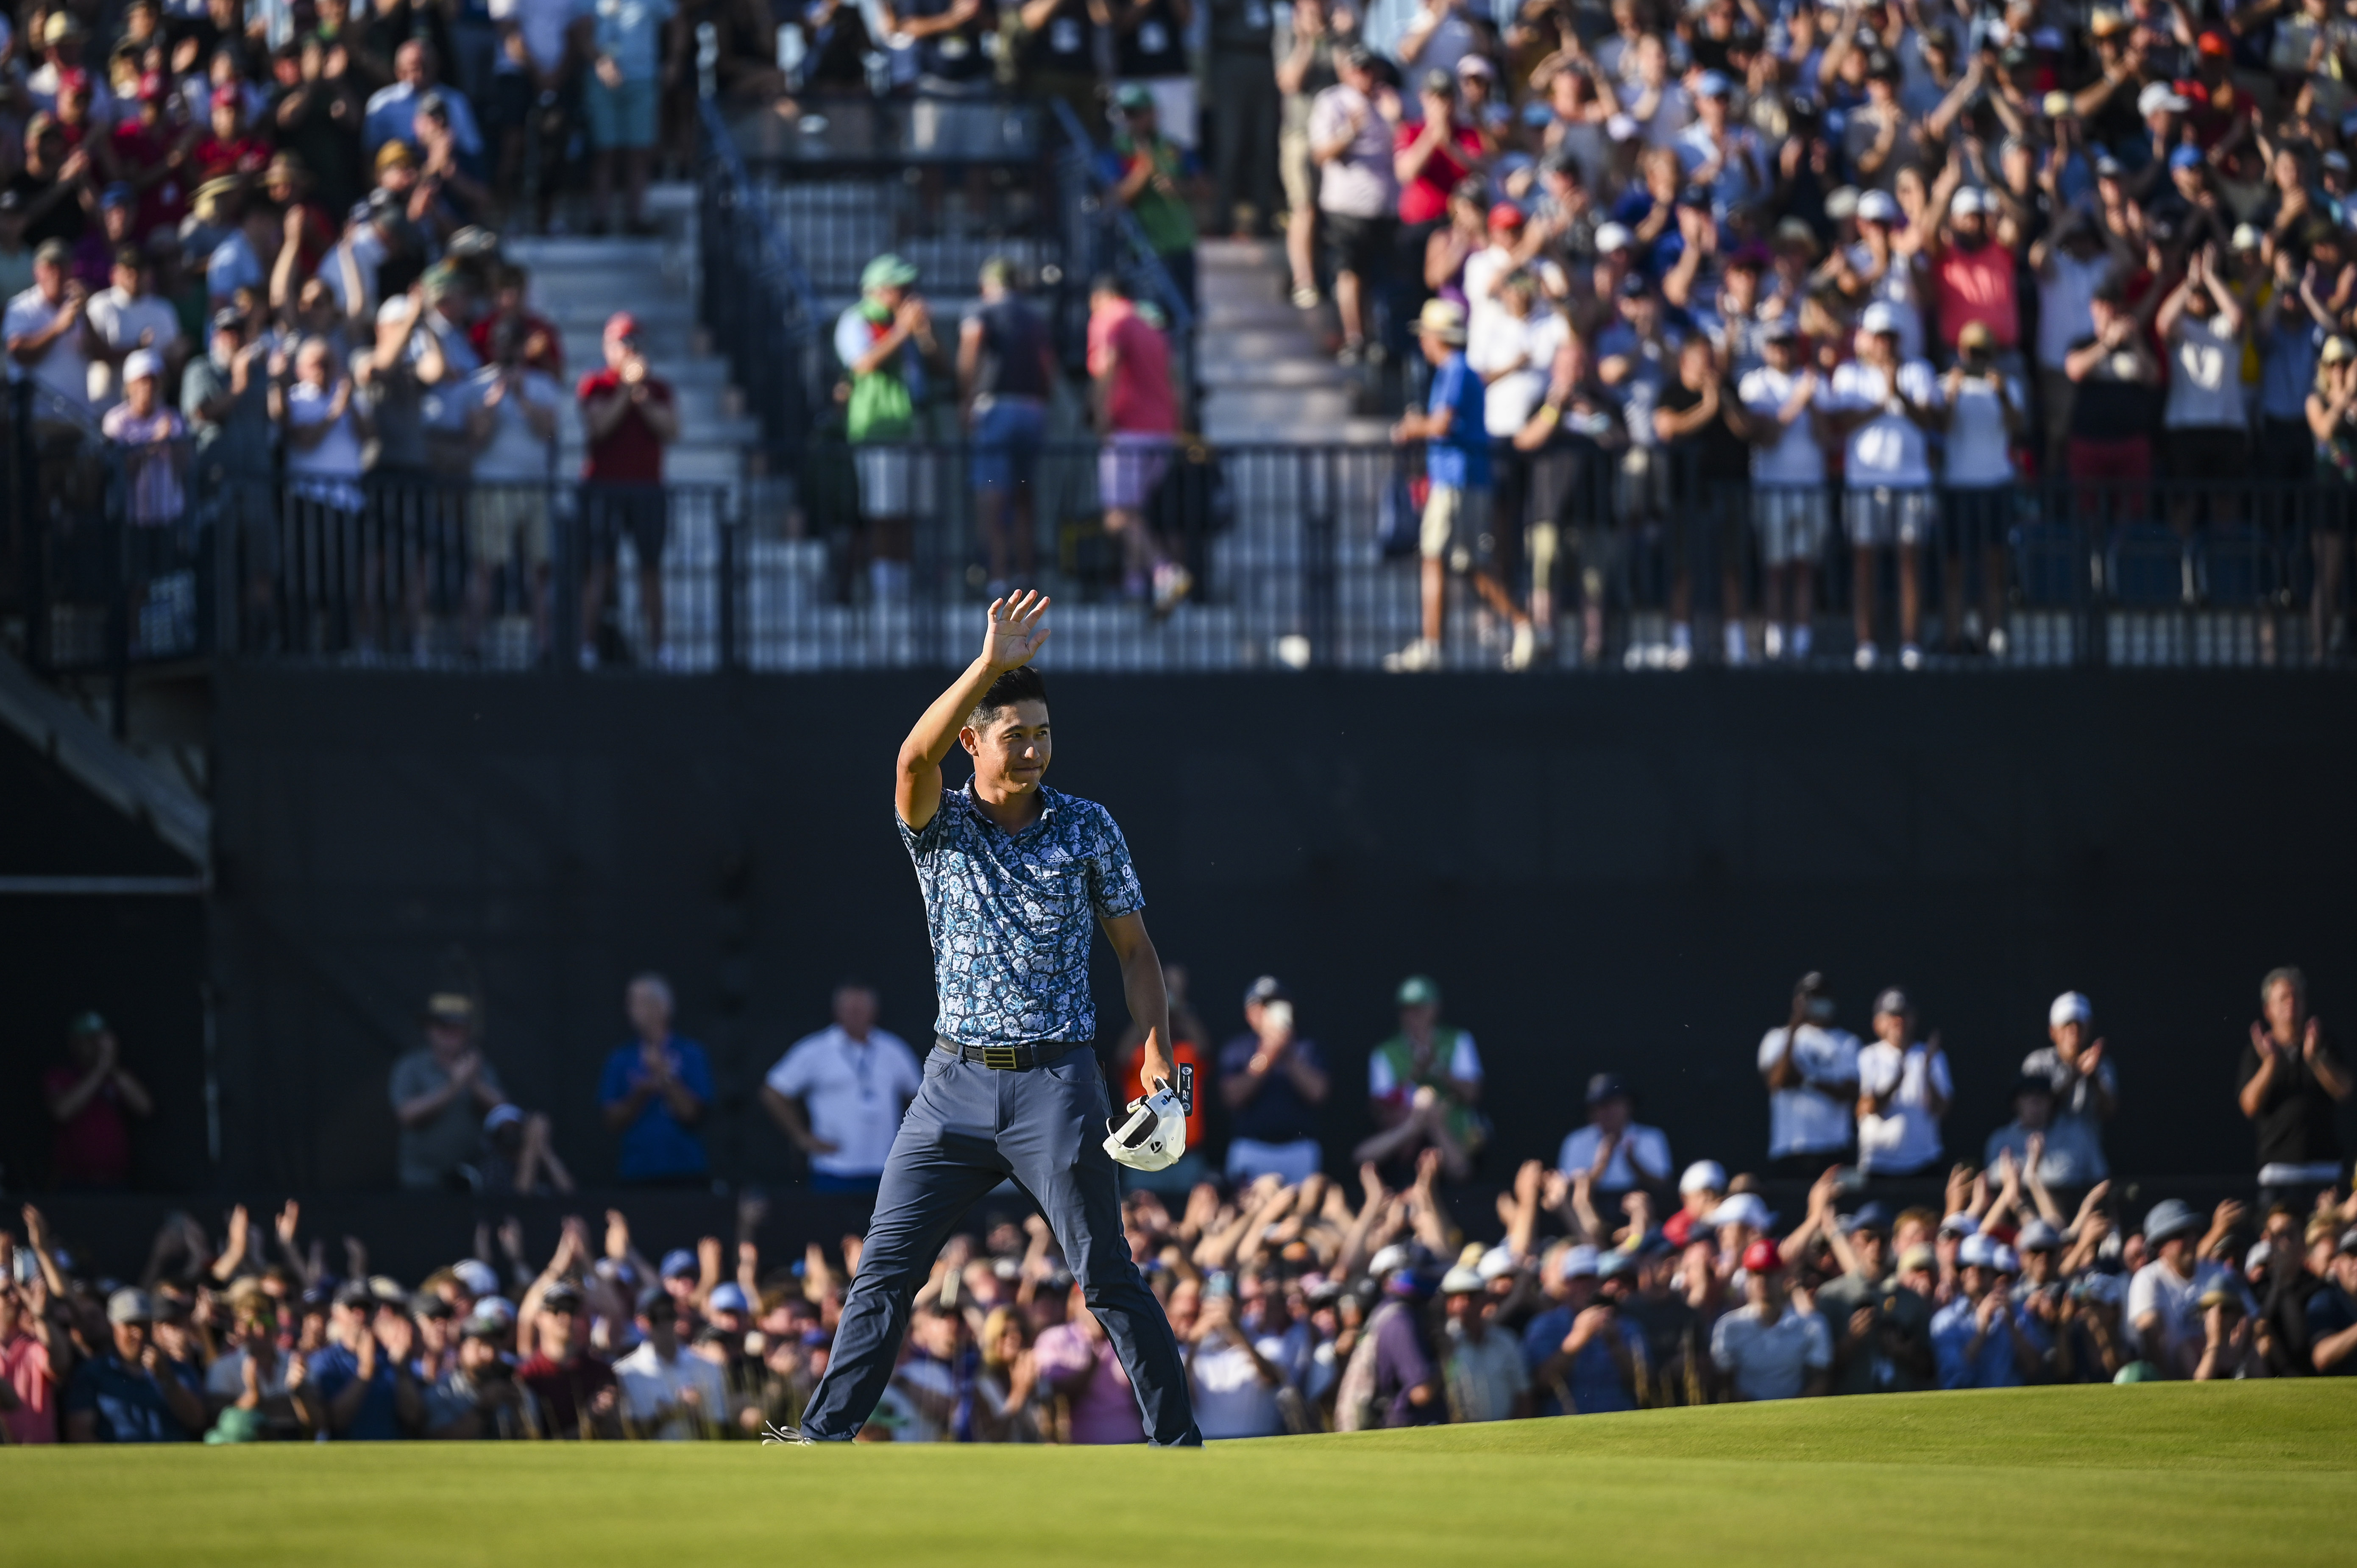 Collin Morikawa smiles and waves to fans following his two stroke victory on the 18th hole green during Day Four of the 149th The Open Championship at Royal St. Georges Golf Club on July 18, 2021 in Sandwich, England.